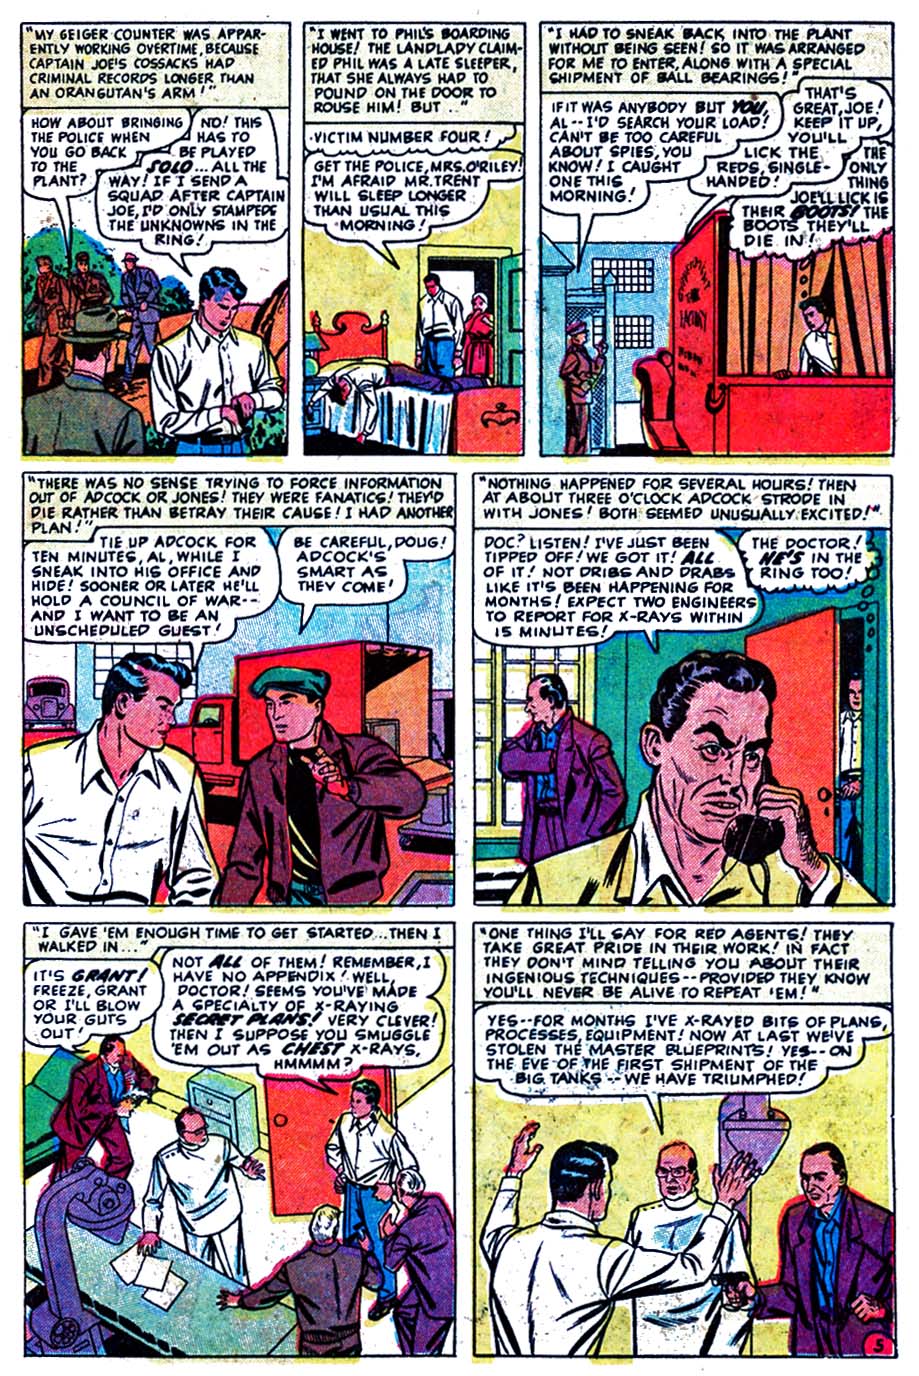 Read online Spy Cases comic -  Issue #28 - 6